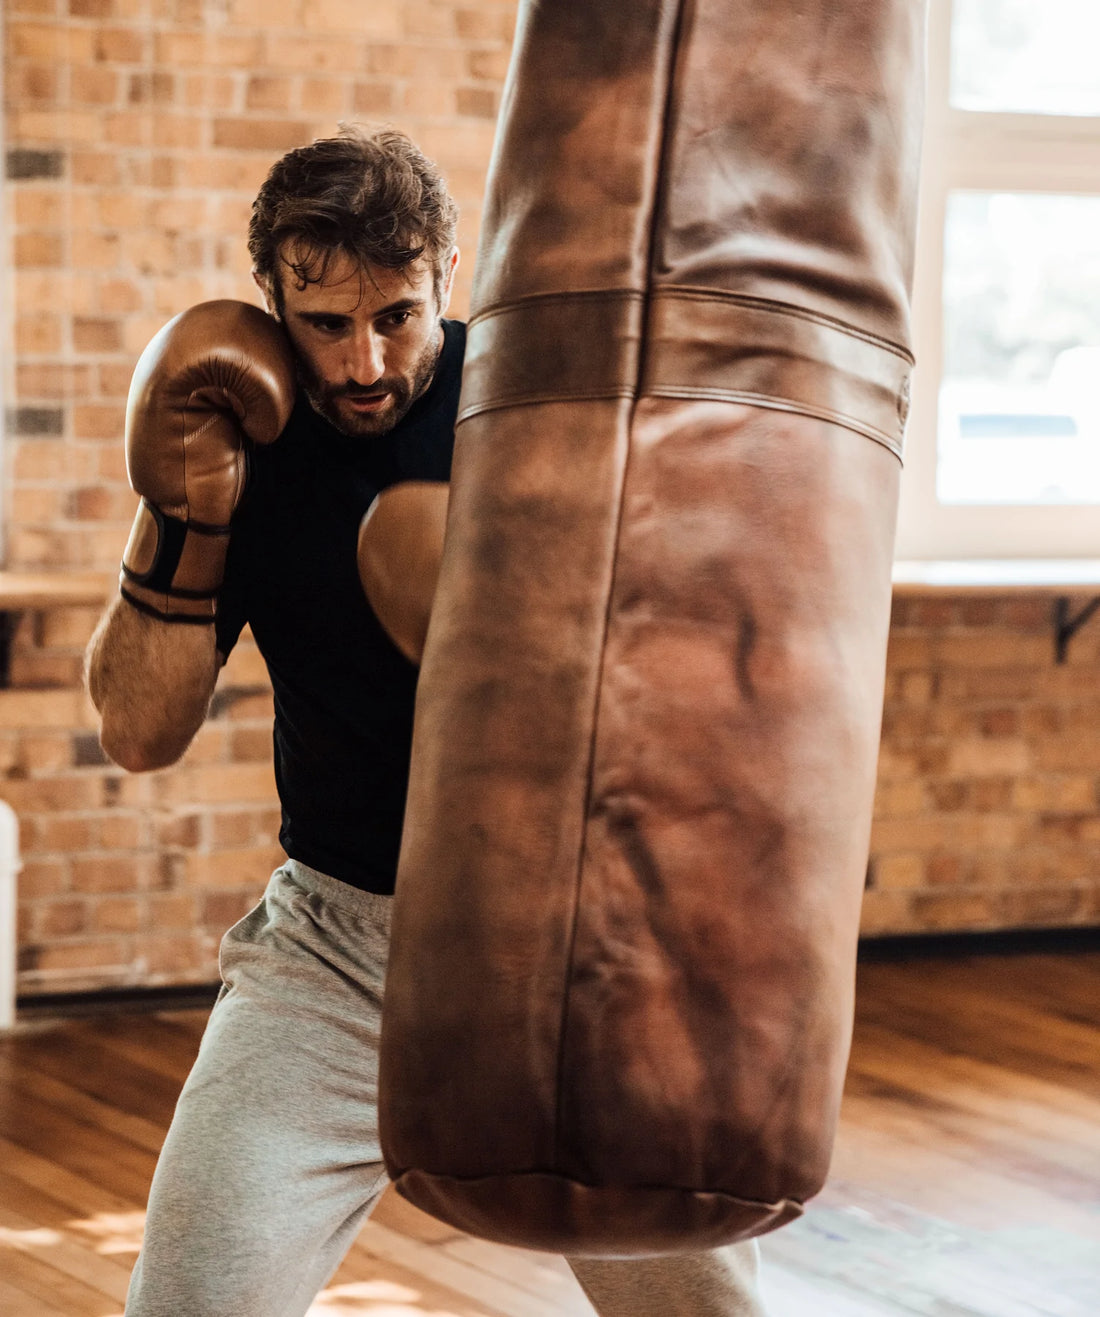 Heavy Punching Bags - Designer Vintage Style Leather | The MVP – MODEST  VINTAGE PLAYER LTD